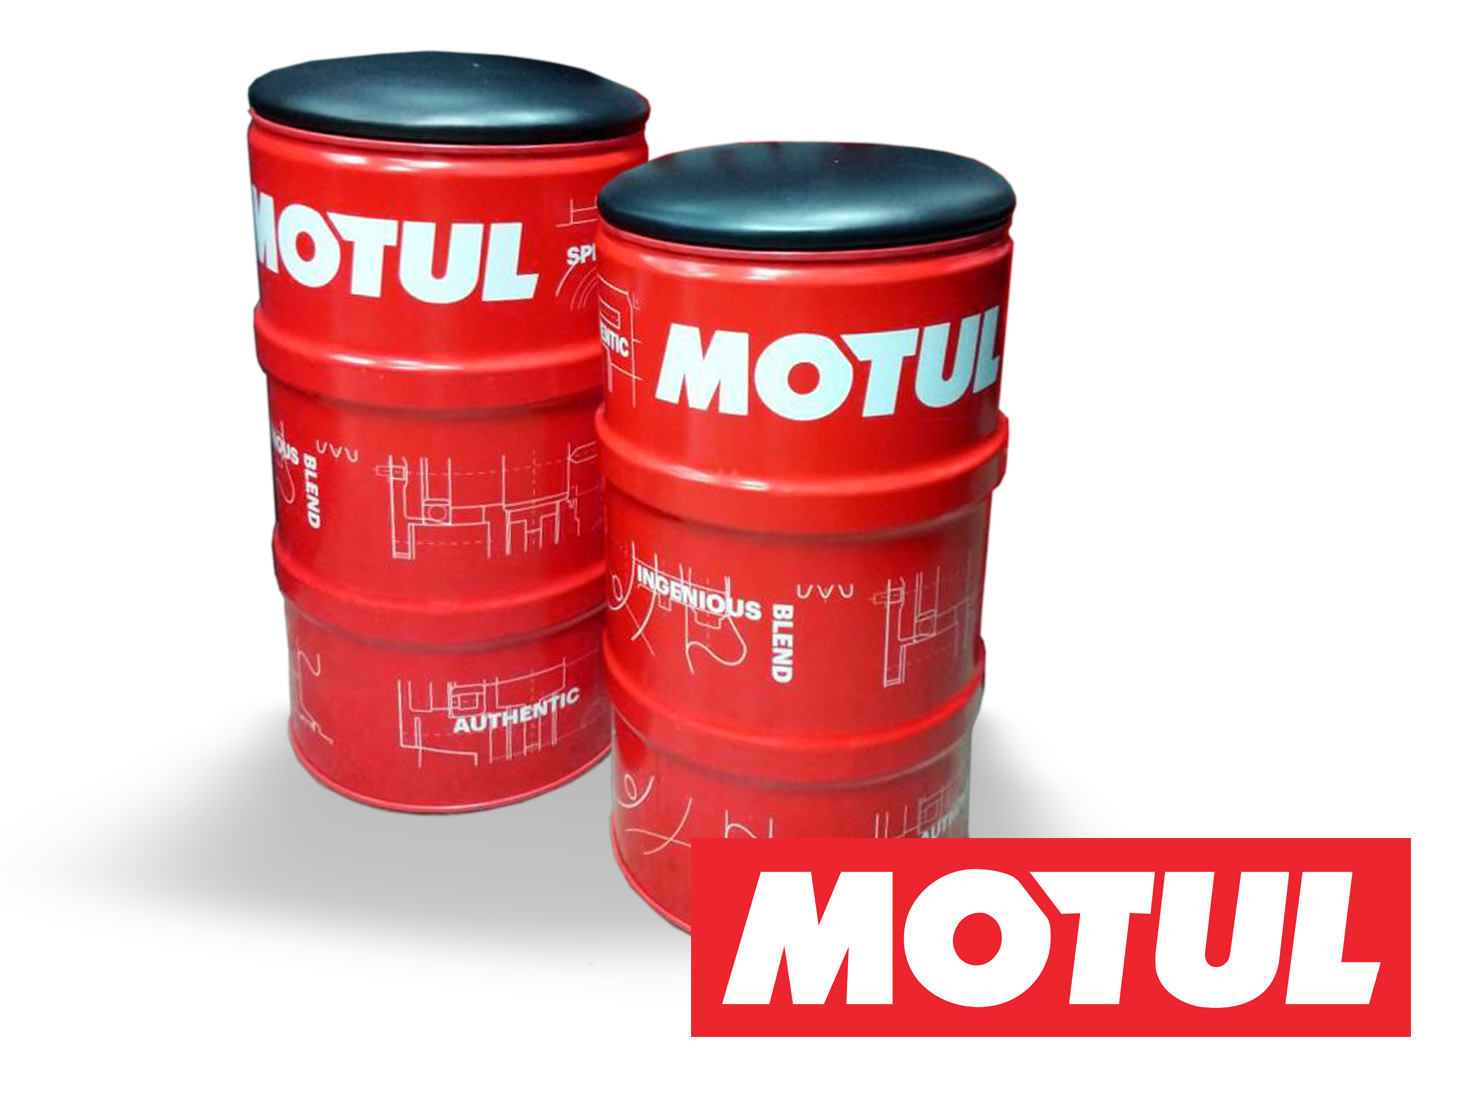 Motul - News/ The Drum - Exciting new partnership for Motul and